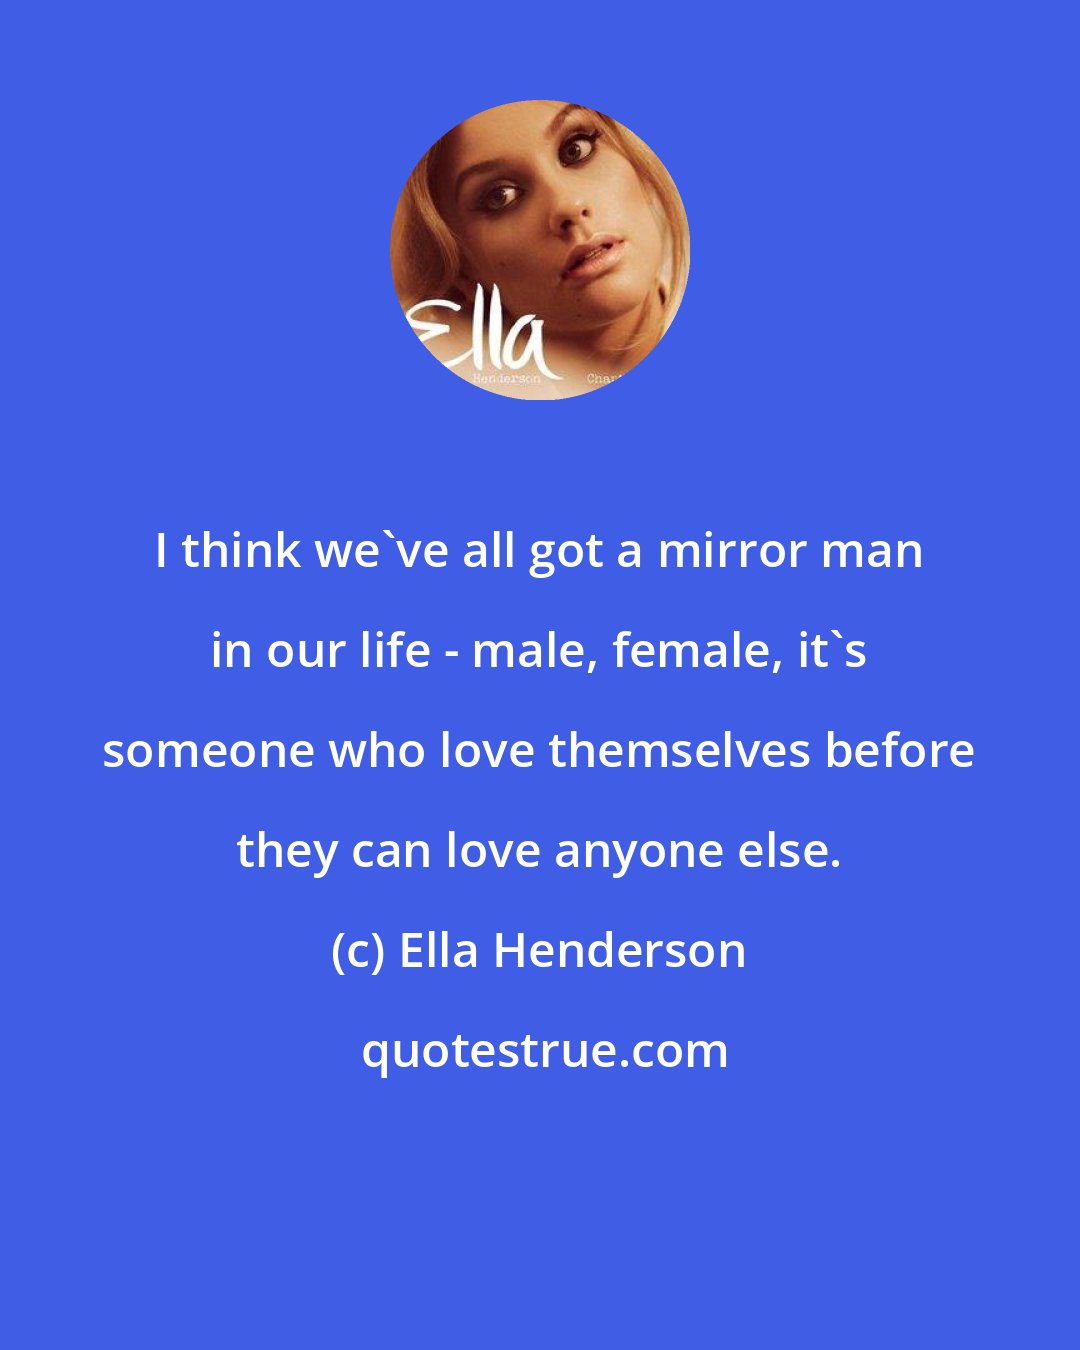 Ella Henderson: I think we've all got a mirror man in our life - male, female, it's someone who love themselves before they can love anyone else.